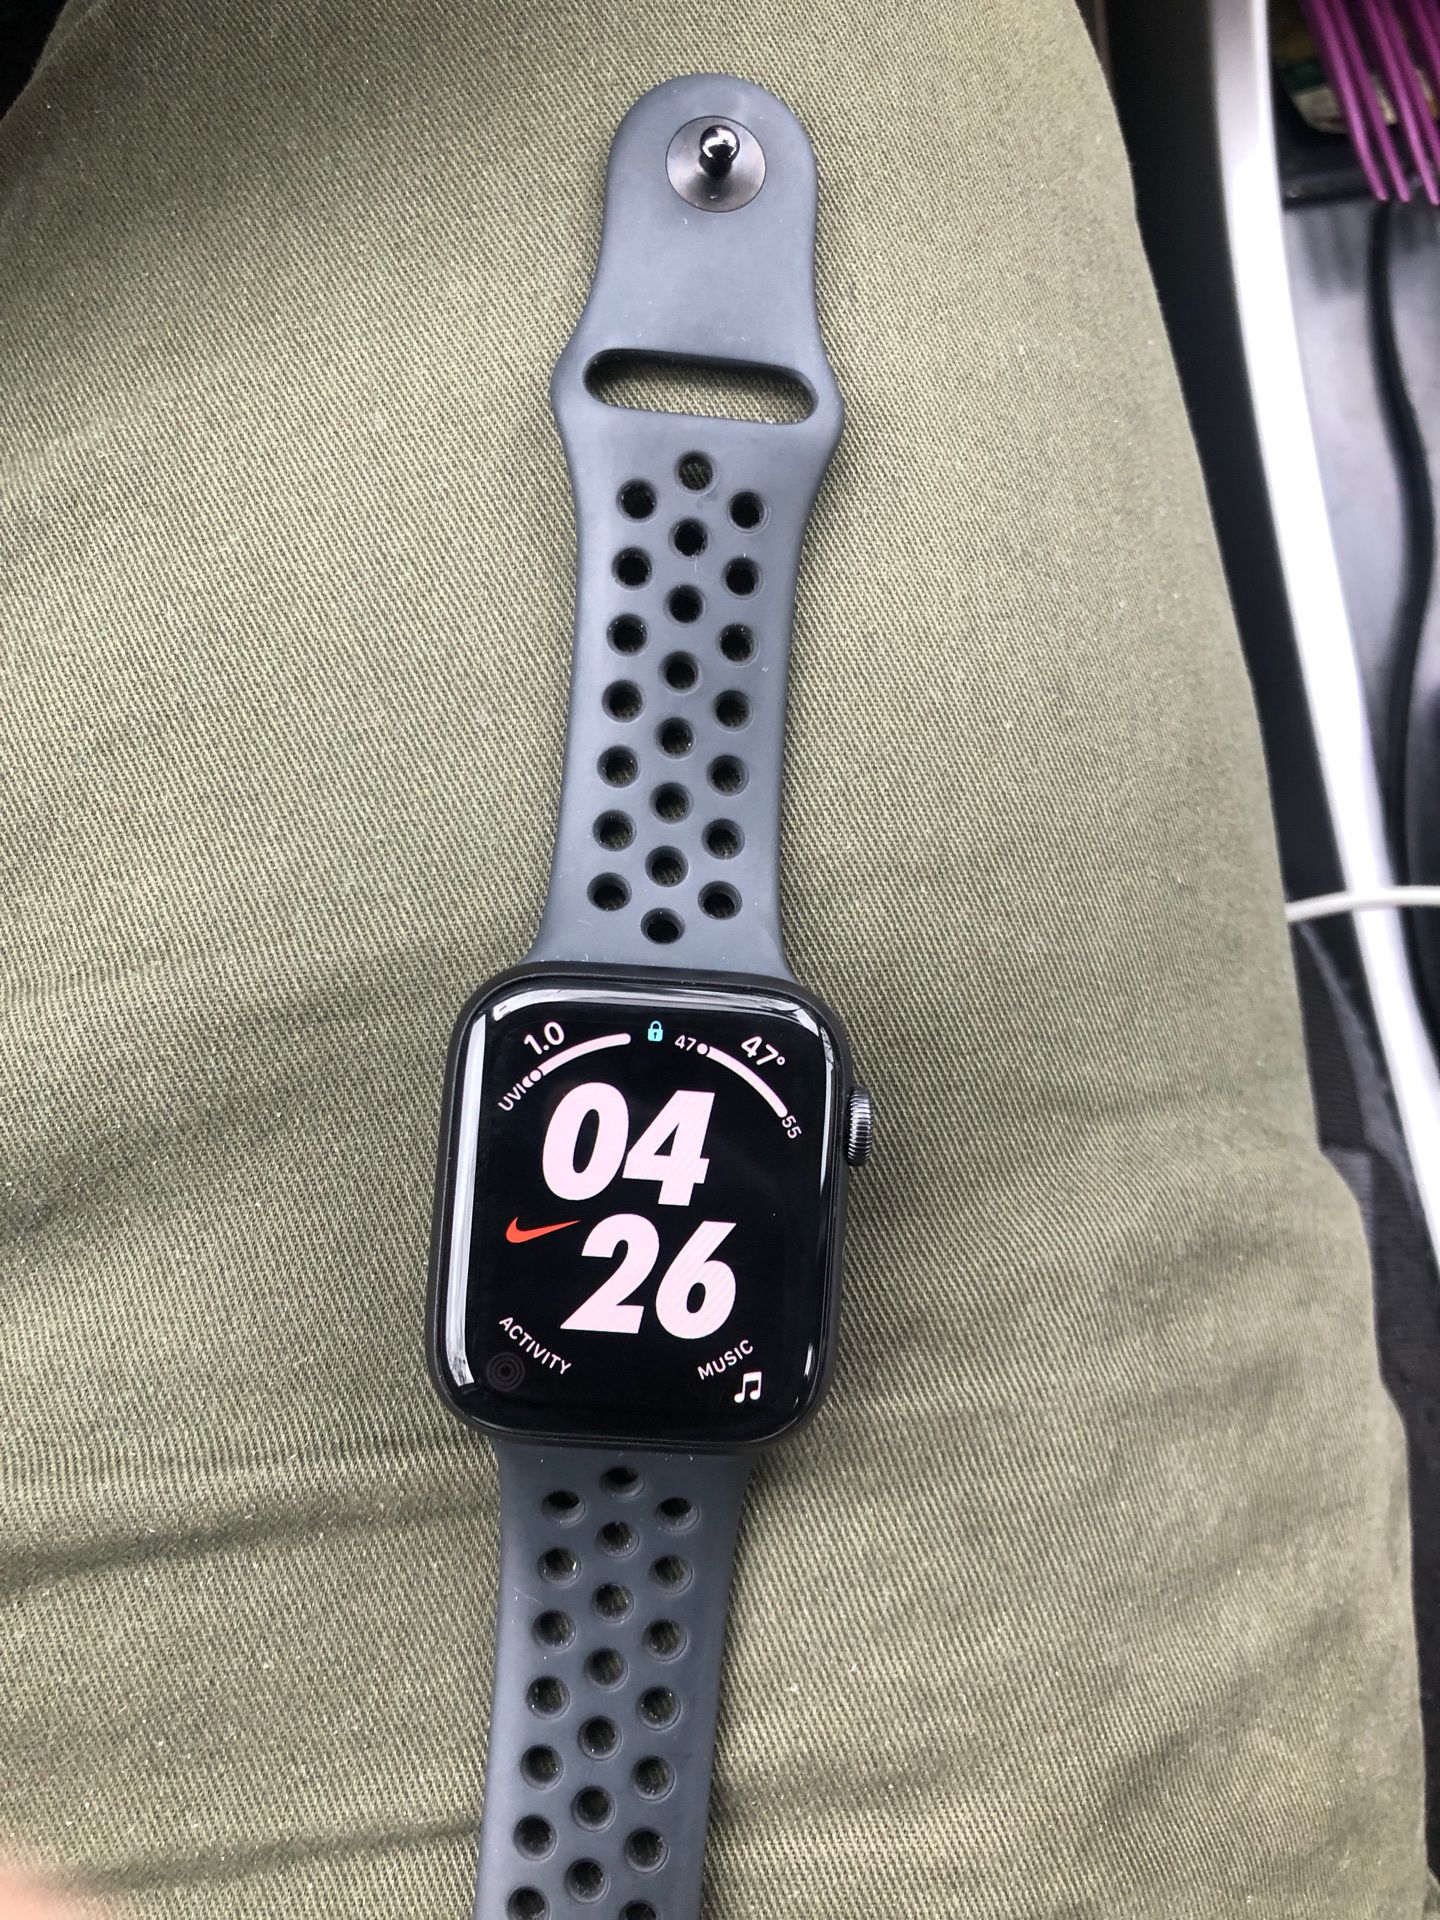 Apple Watch 5 series with AirPods gen 2